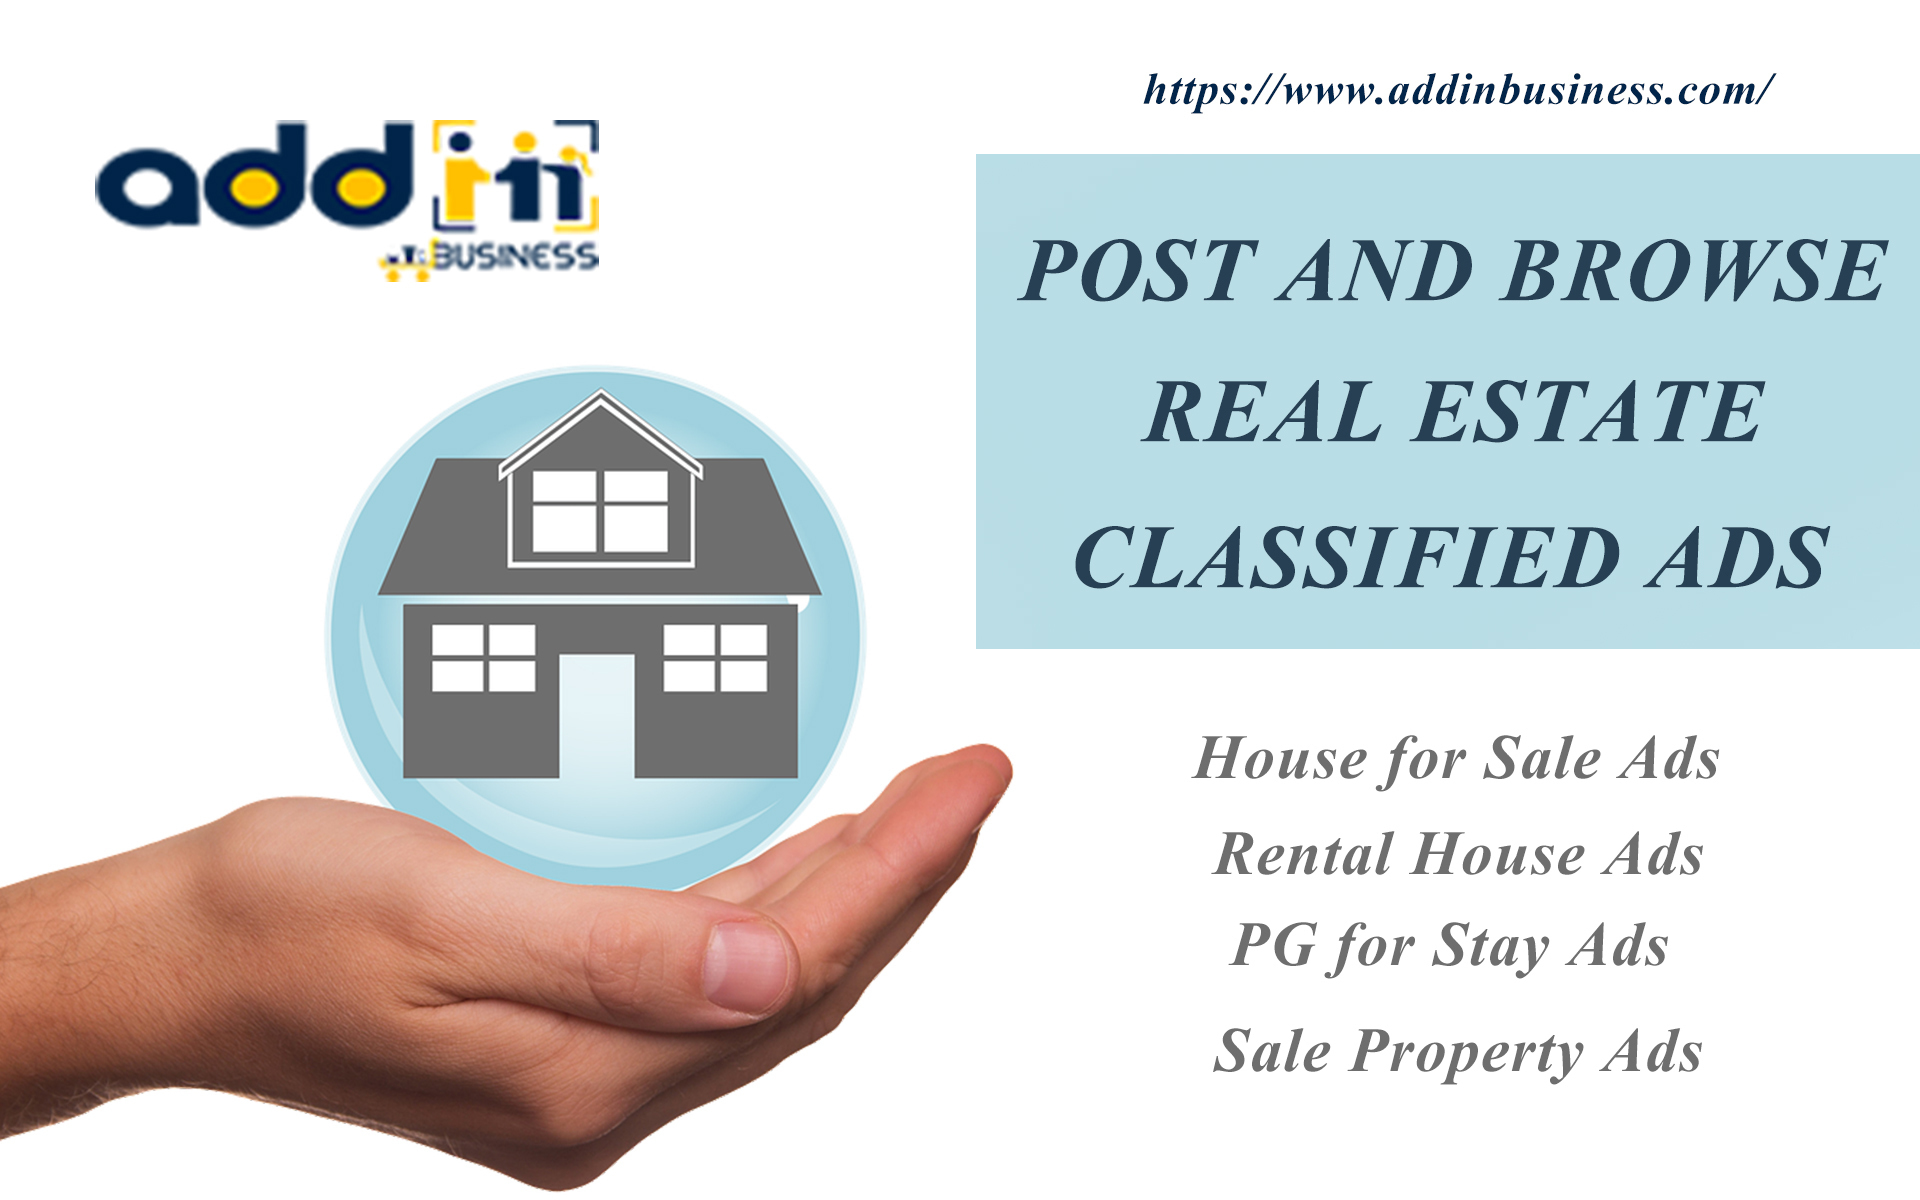 Ad posting. Classified ads. Real Estate classifieds. Real Estate advertisement.